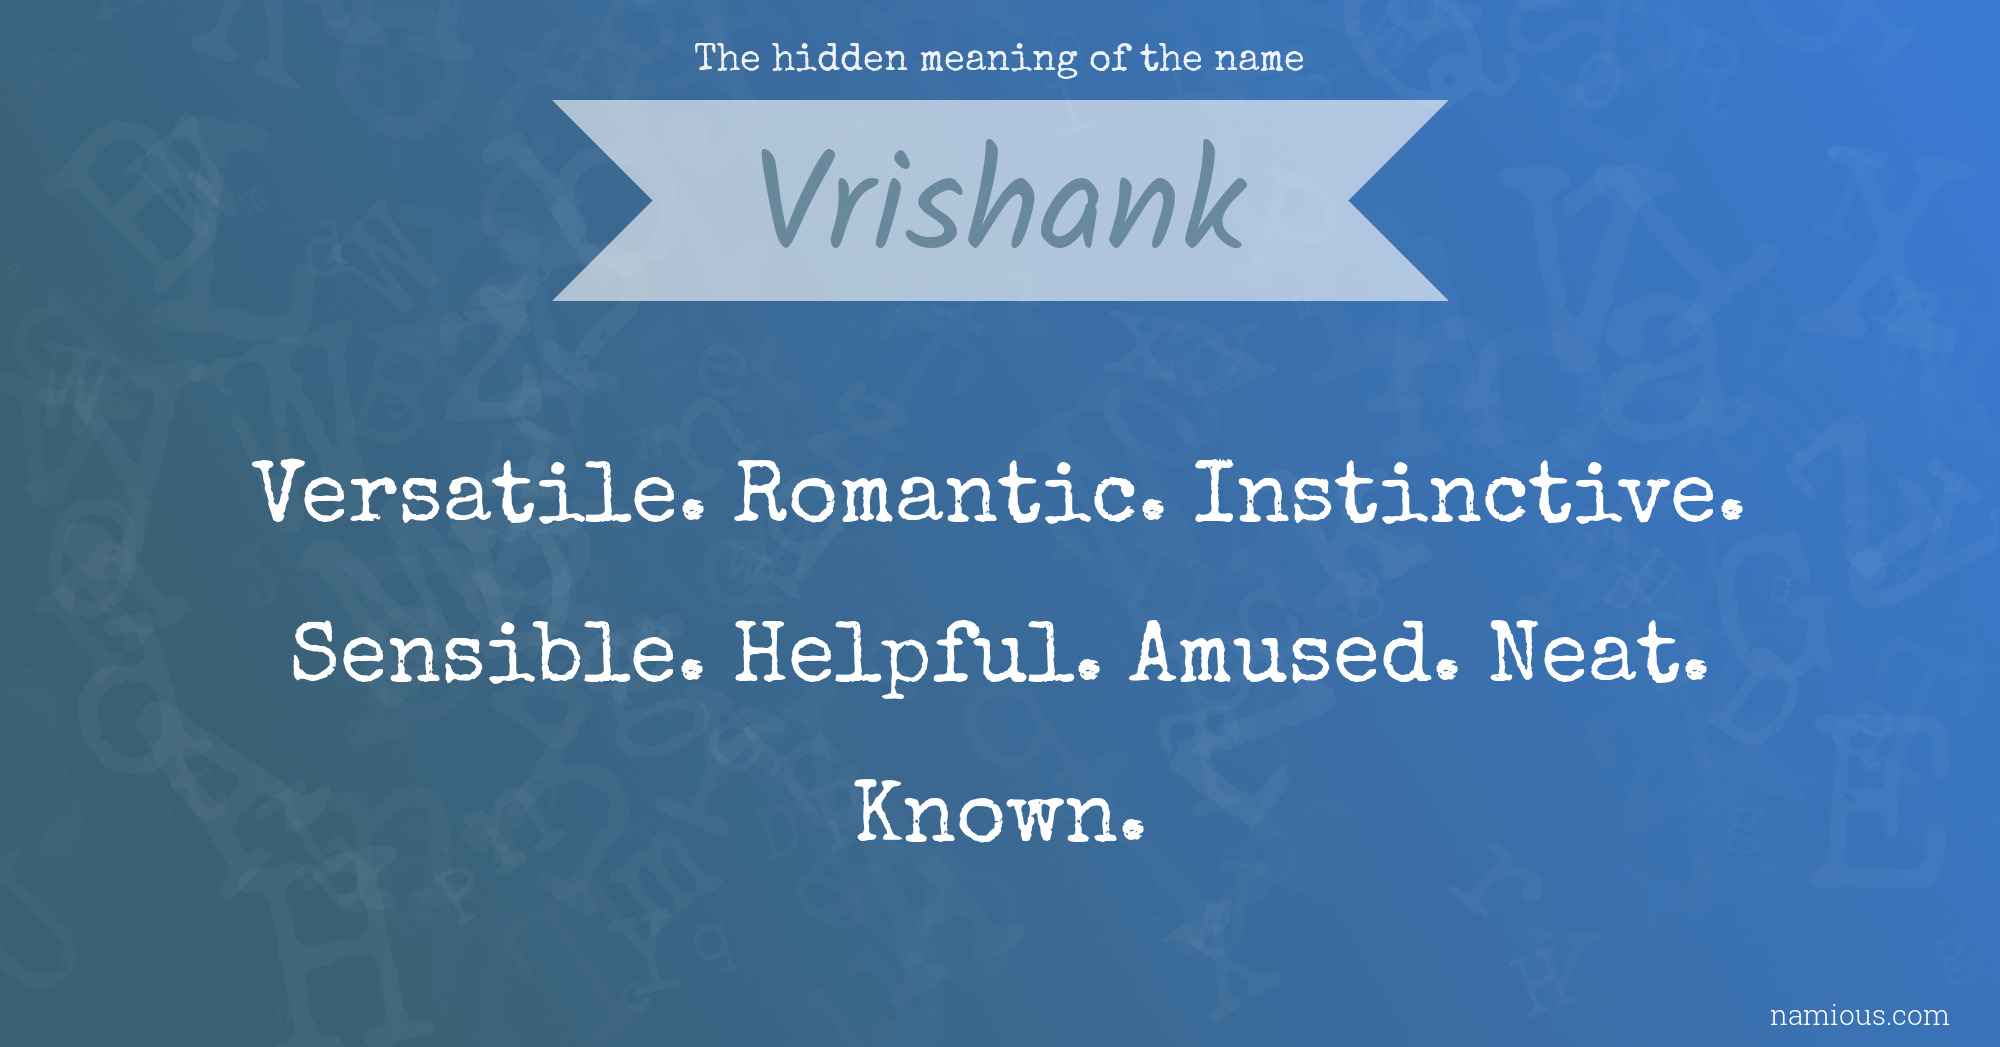 The hidden meaning of the name Vrishank